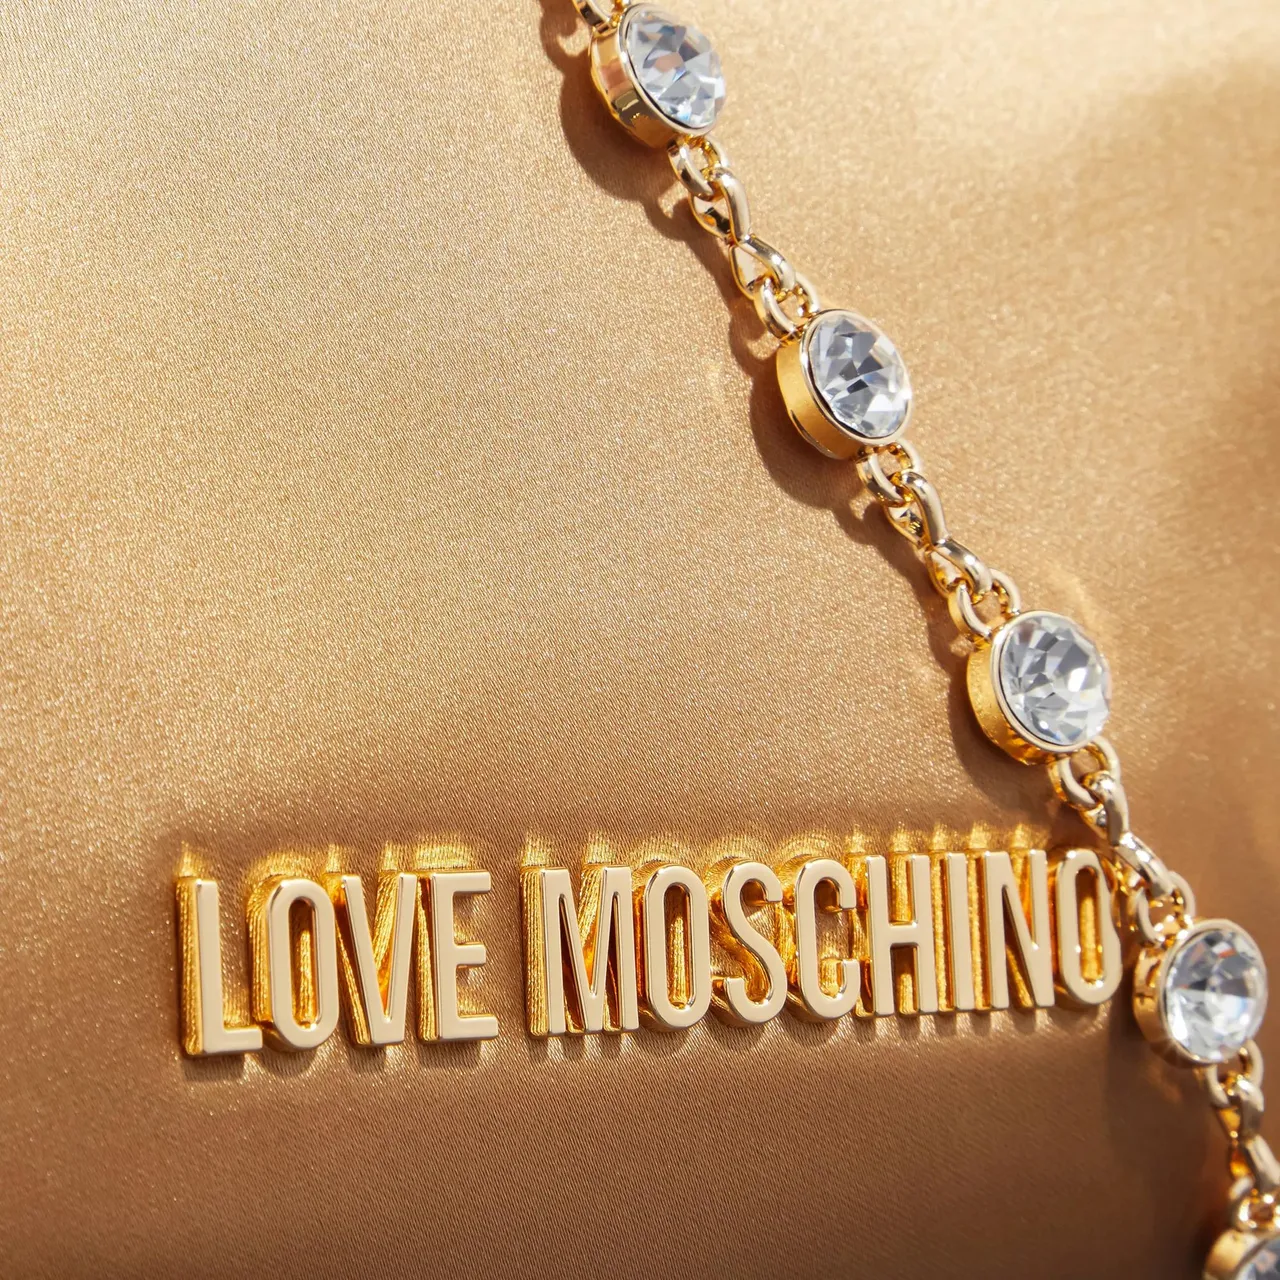 Love Moschino Crossbody Bags - Smart Daily Bag - gold - Crossbody Bags for ladies